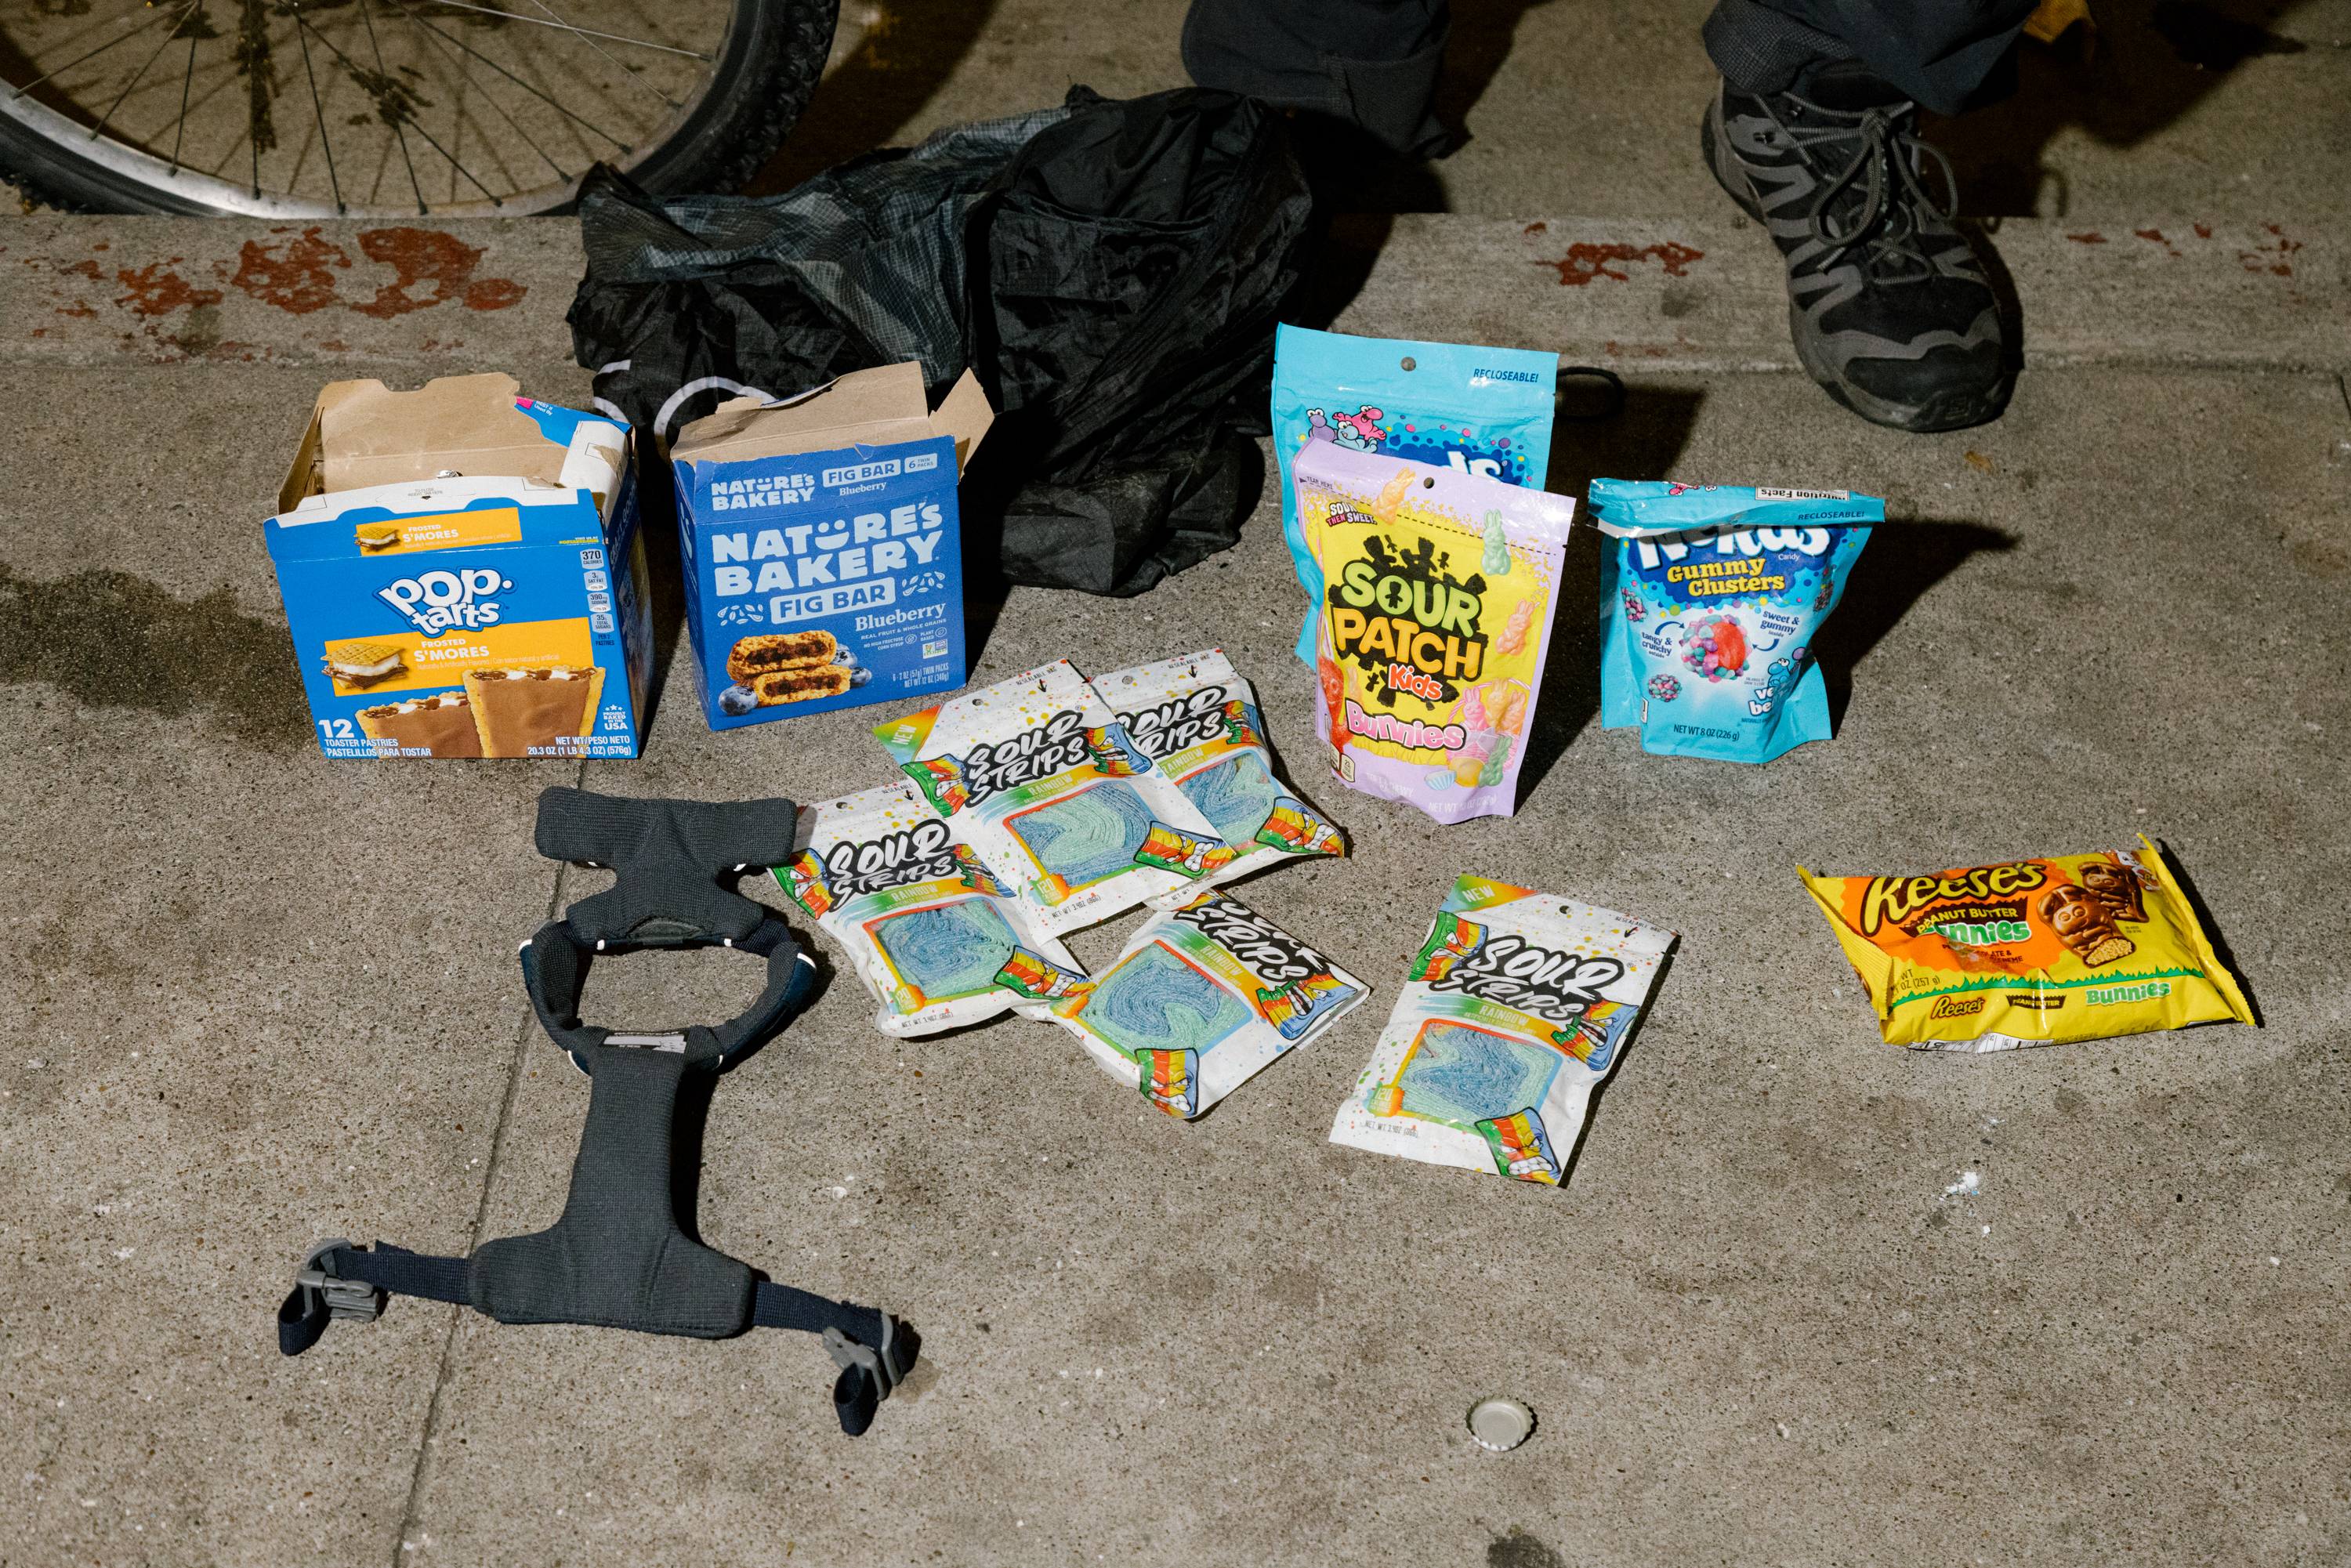 Assorted snacks and candy scattered on the ground, including Pop-Tarts, with a person's shoe visible.